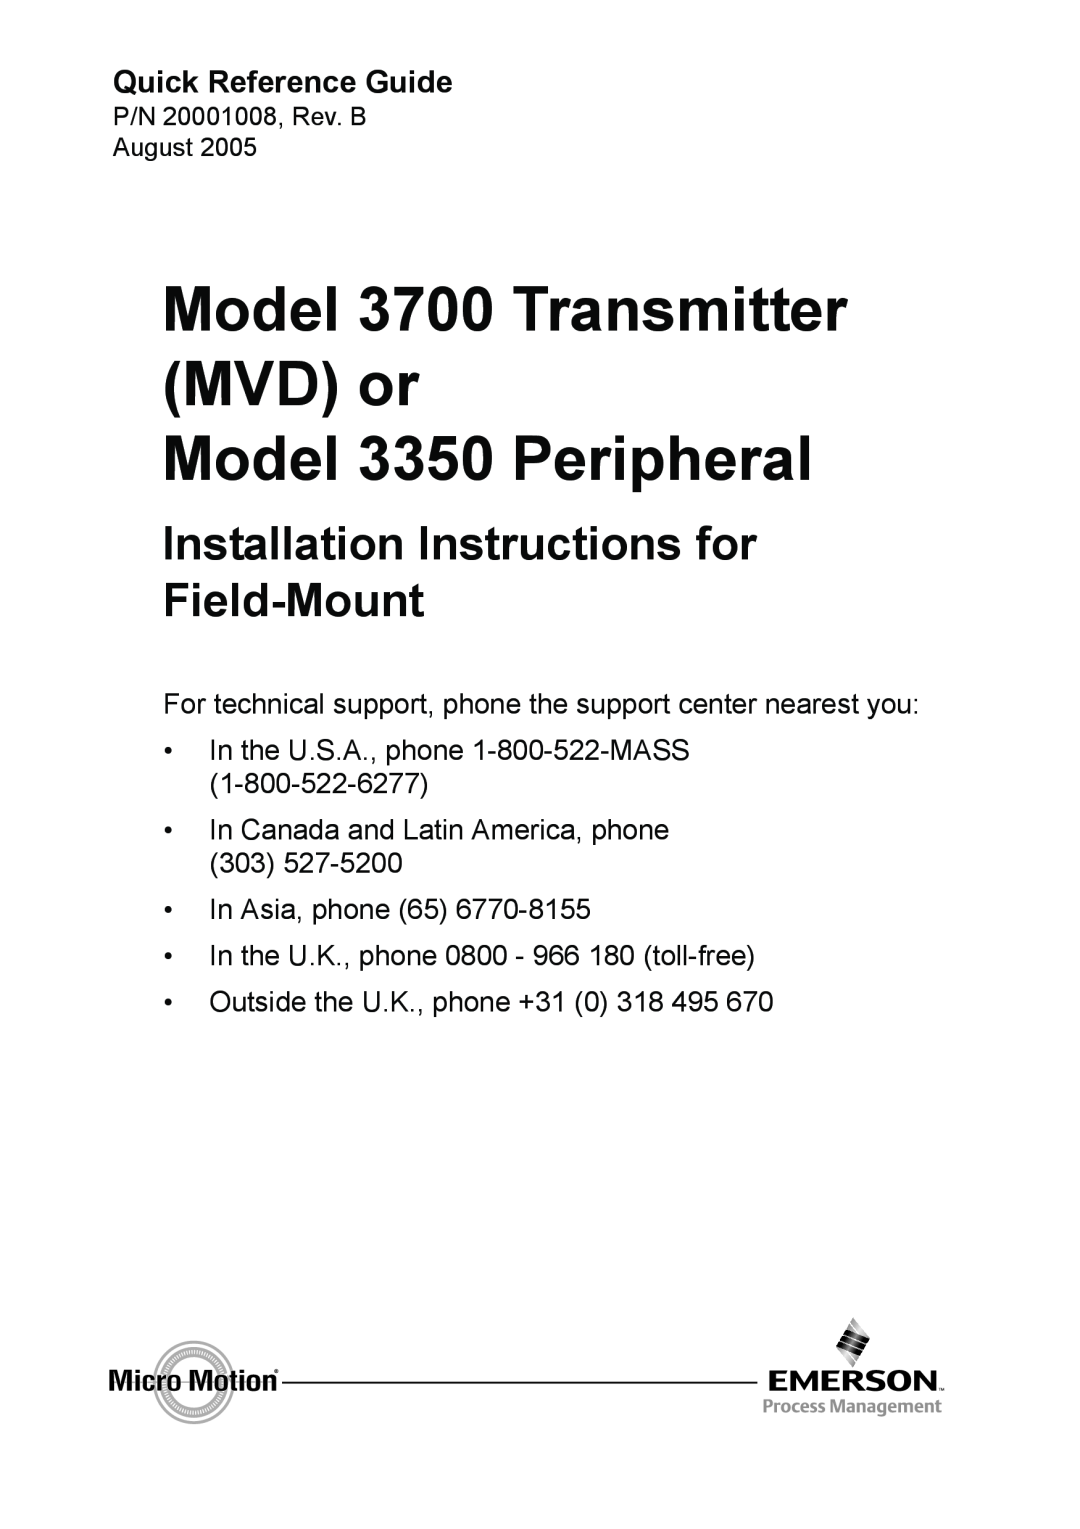 Emerson installation instructions Model 3700 Transmitter MVD or, Model 3350 Peripheral, Quick Reference Guide 